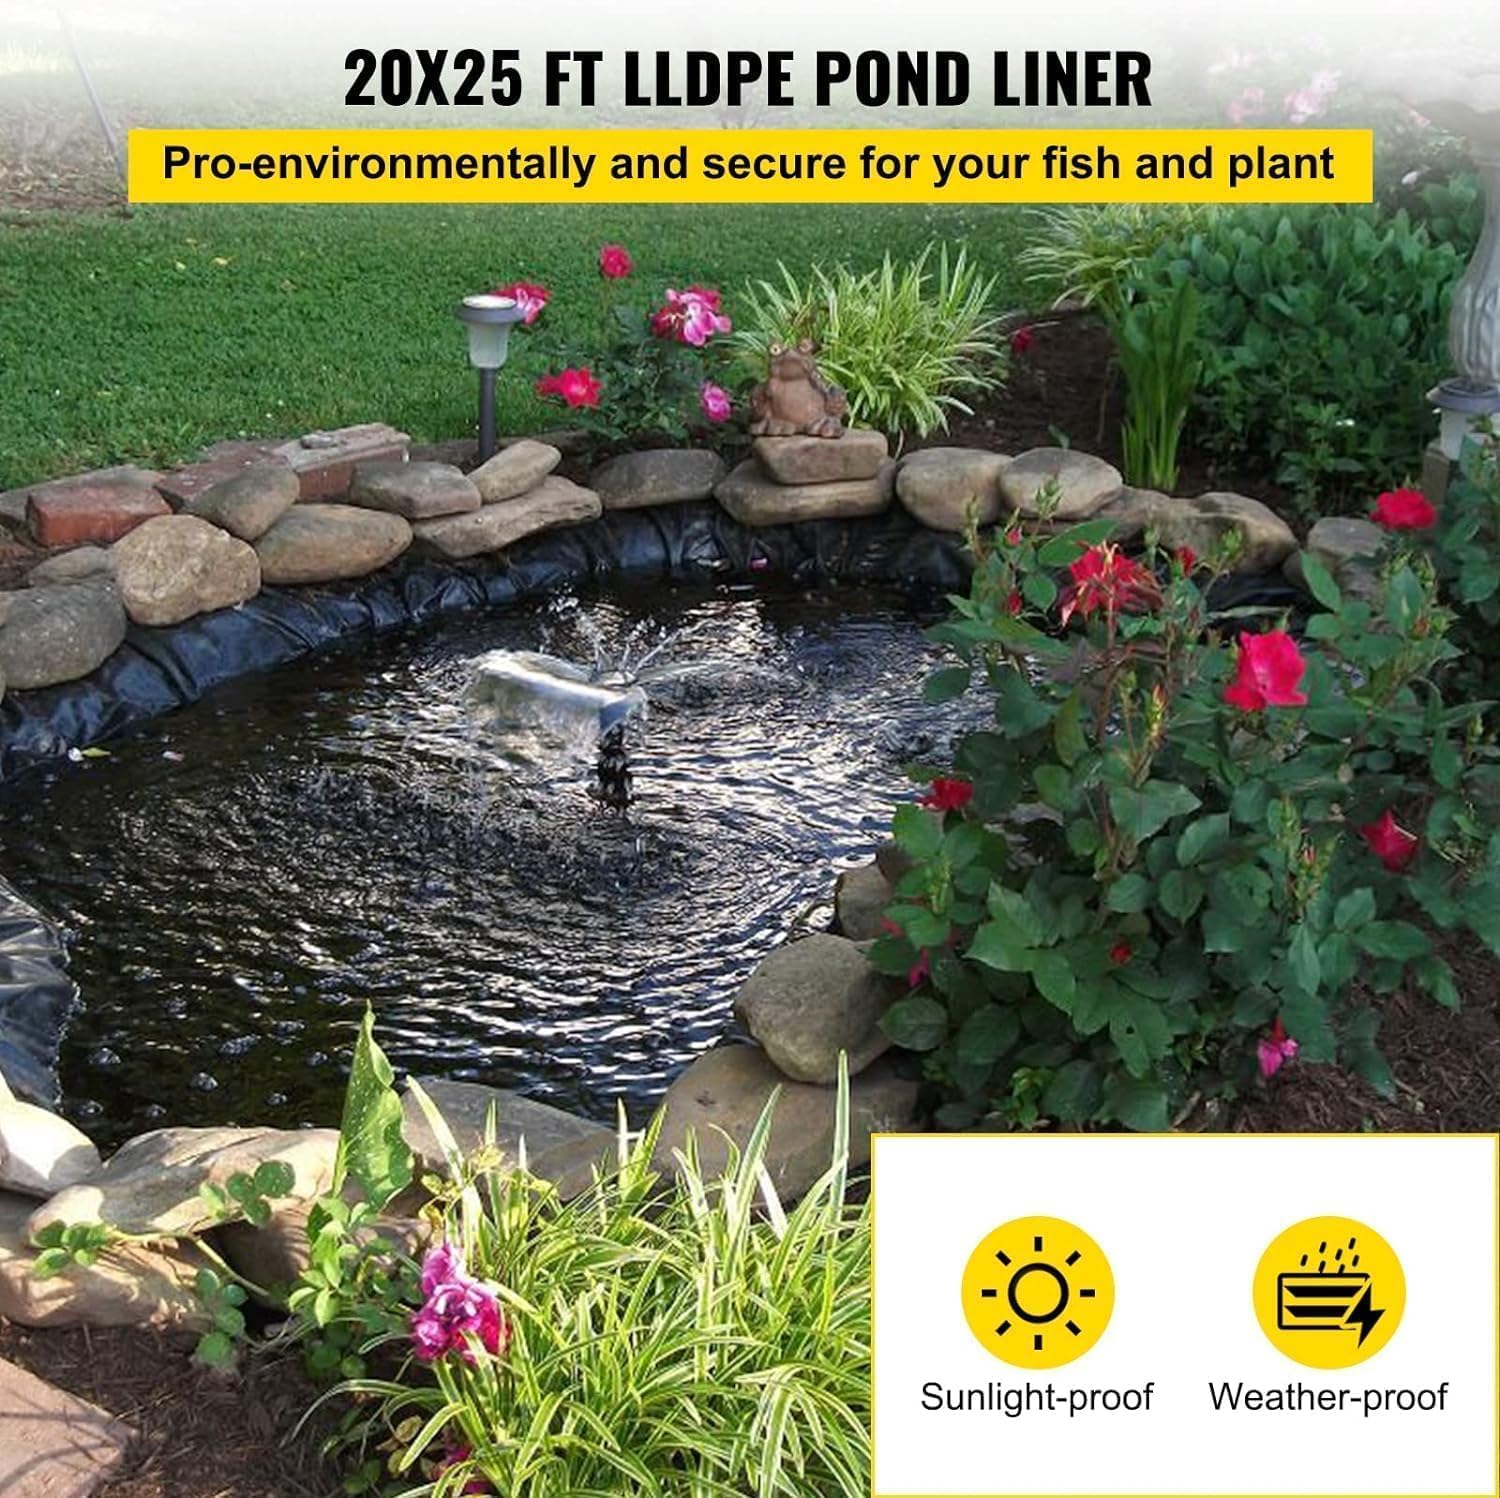 10x13 ft Pond Liner, 20 Mil Thickness, Pliable & Durable LLDEP Material, Easy Cutting & UV Resistant, for Fish or Koi, Features, Waterfall Base, Fountains and Water Gardens